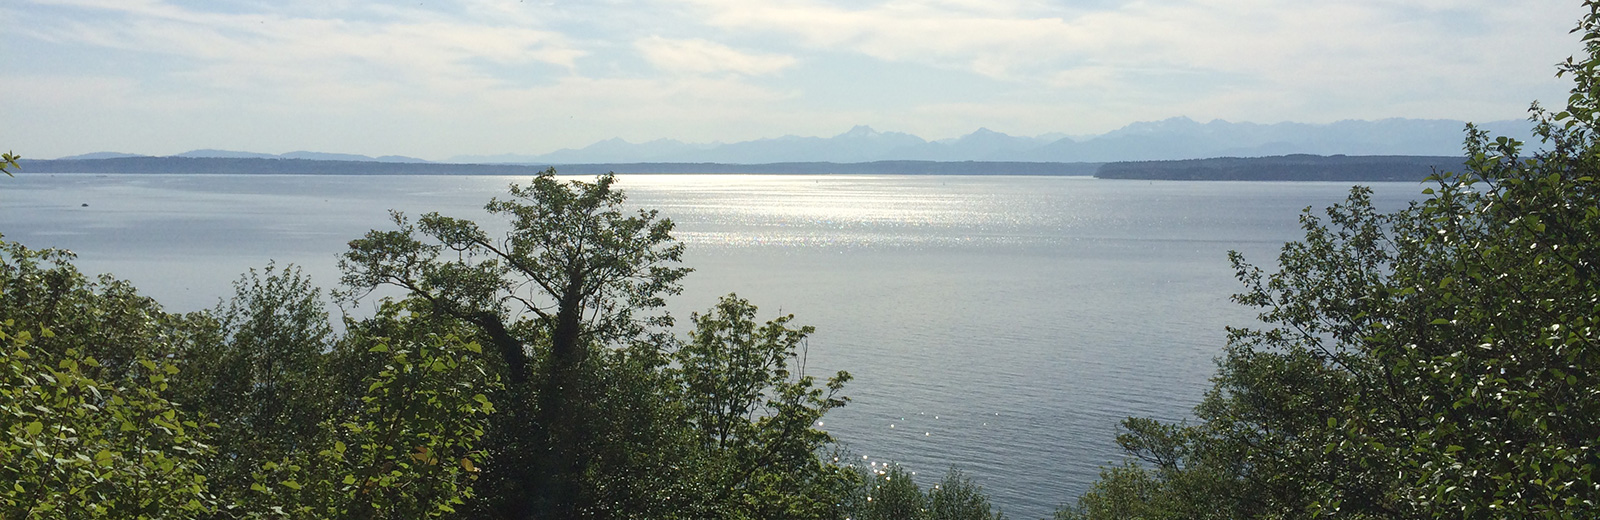 View of Puget Sound